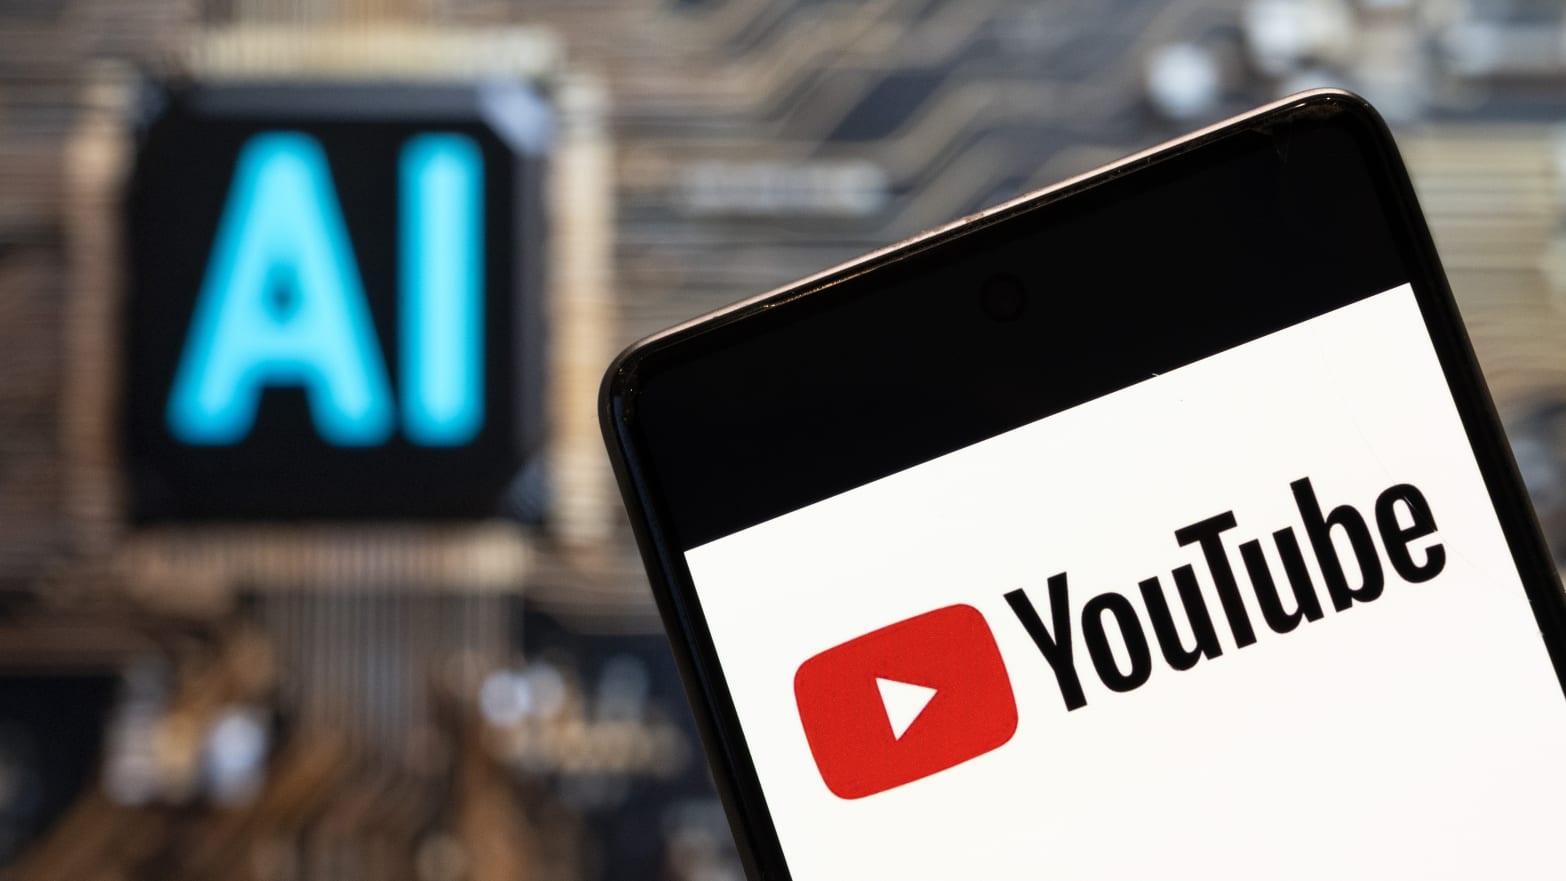 In this photo illustration, the American video-sharing website platform owned by Google, YouTube, logo seen displayed on a smartphone with an Artificial intelligence (AI) chip and symbol in the background. 